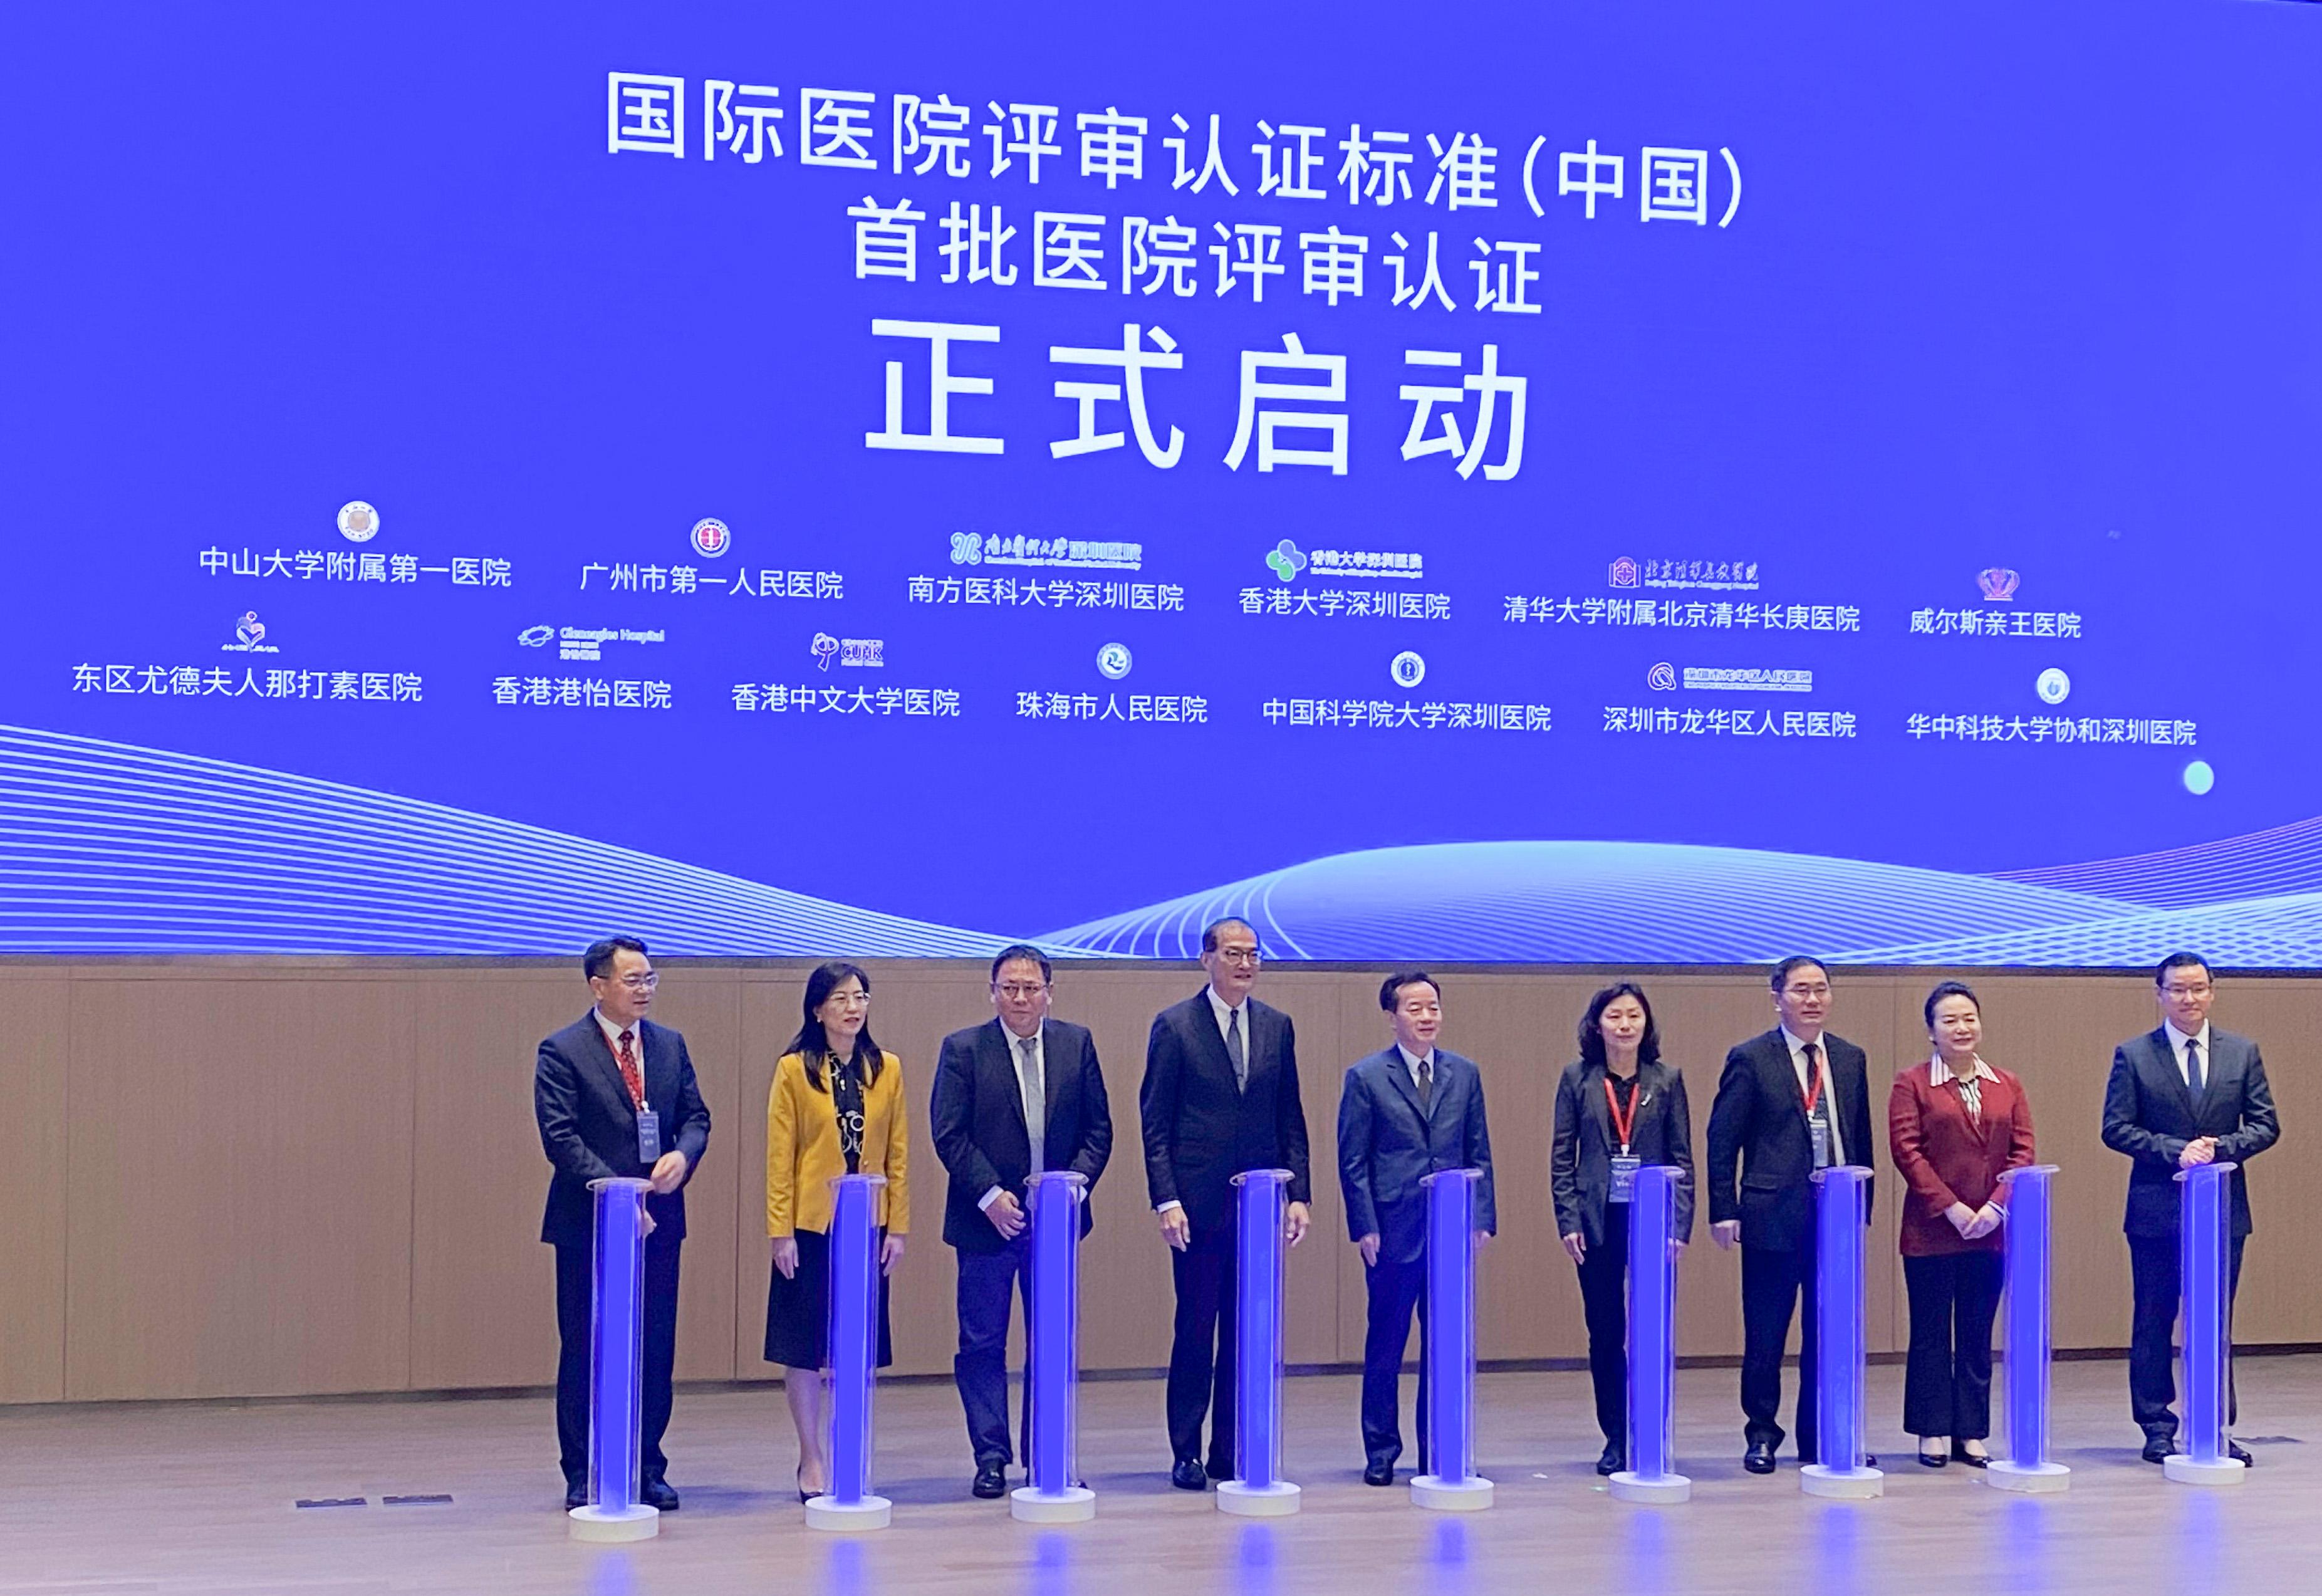 The Secretary for Health, Professor Lo Chung-mau (fourth left), joined the China's International Healthcare Accreditation Standards Hospital Accreditation Launching Ceremony today (March 30).